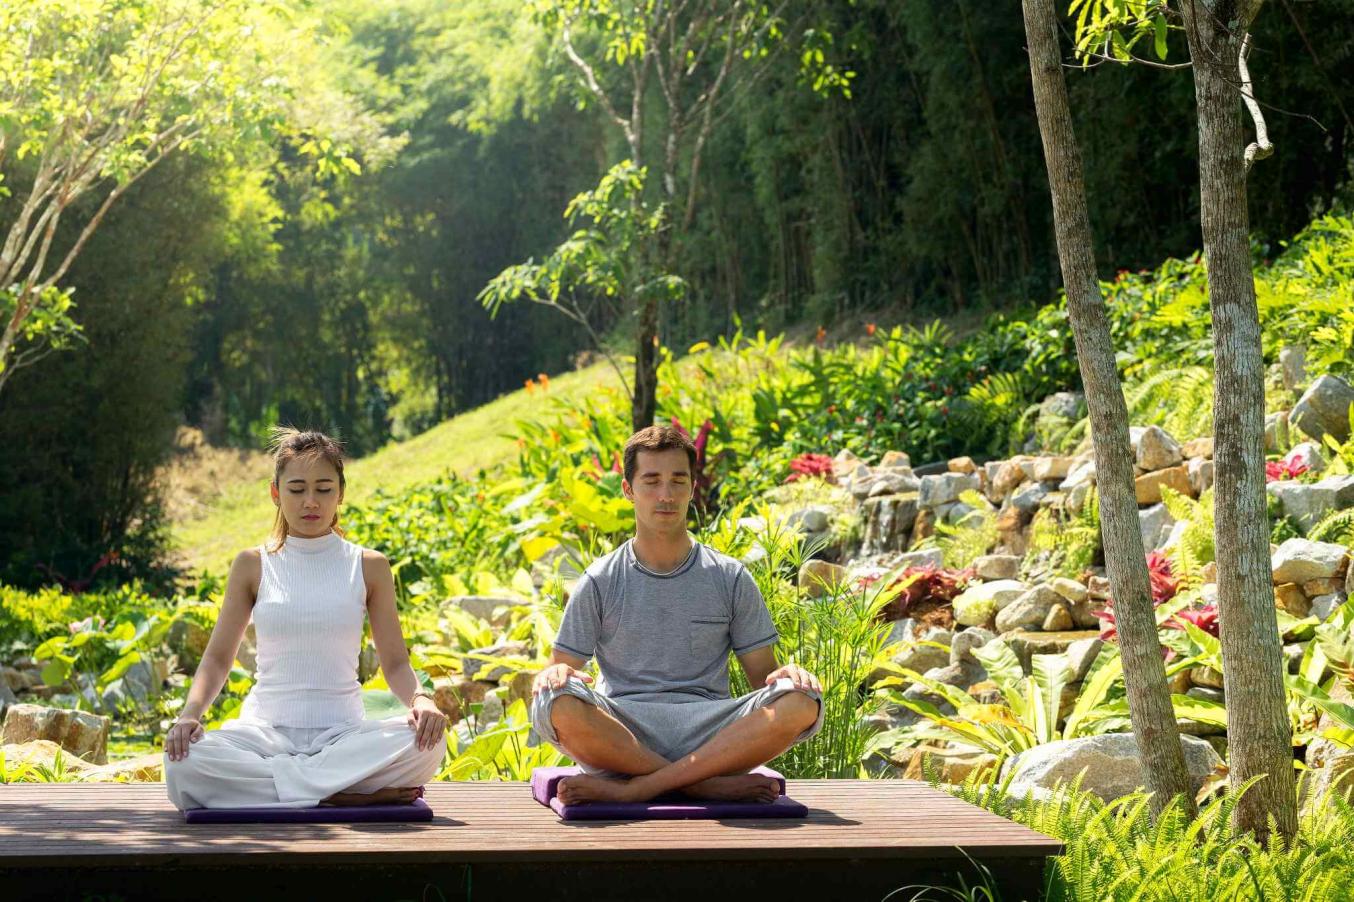 What Should I Expect During A Wellness Or Detox Retreat?